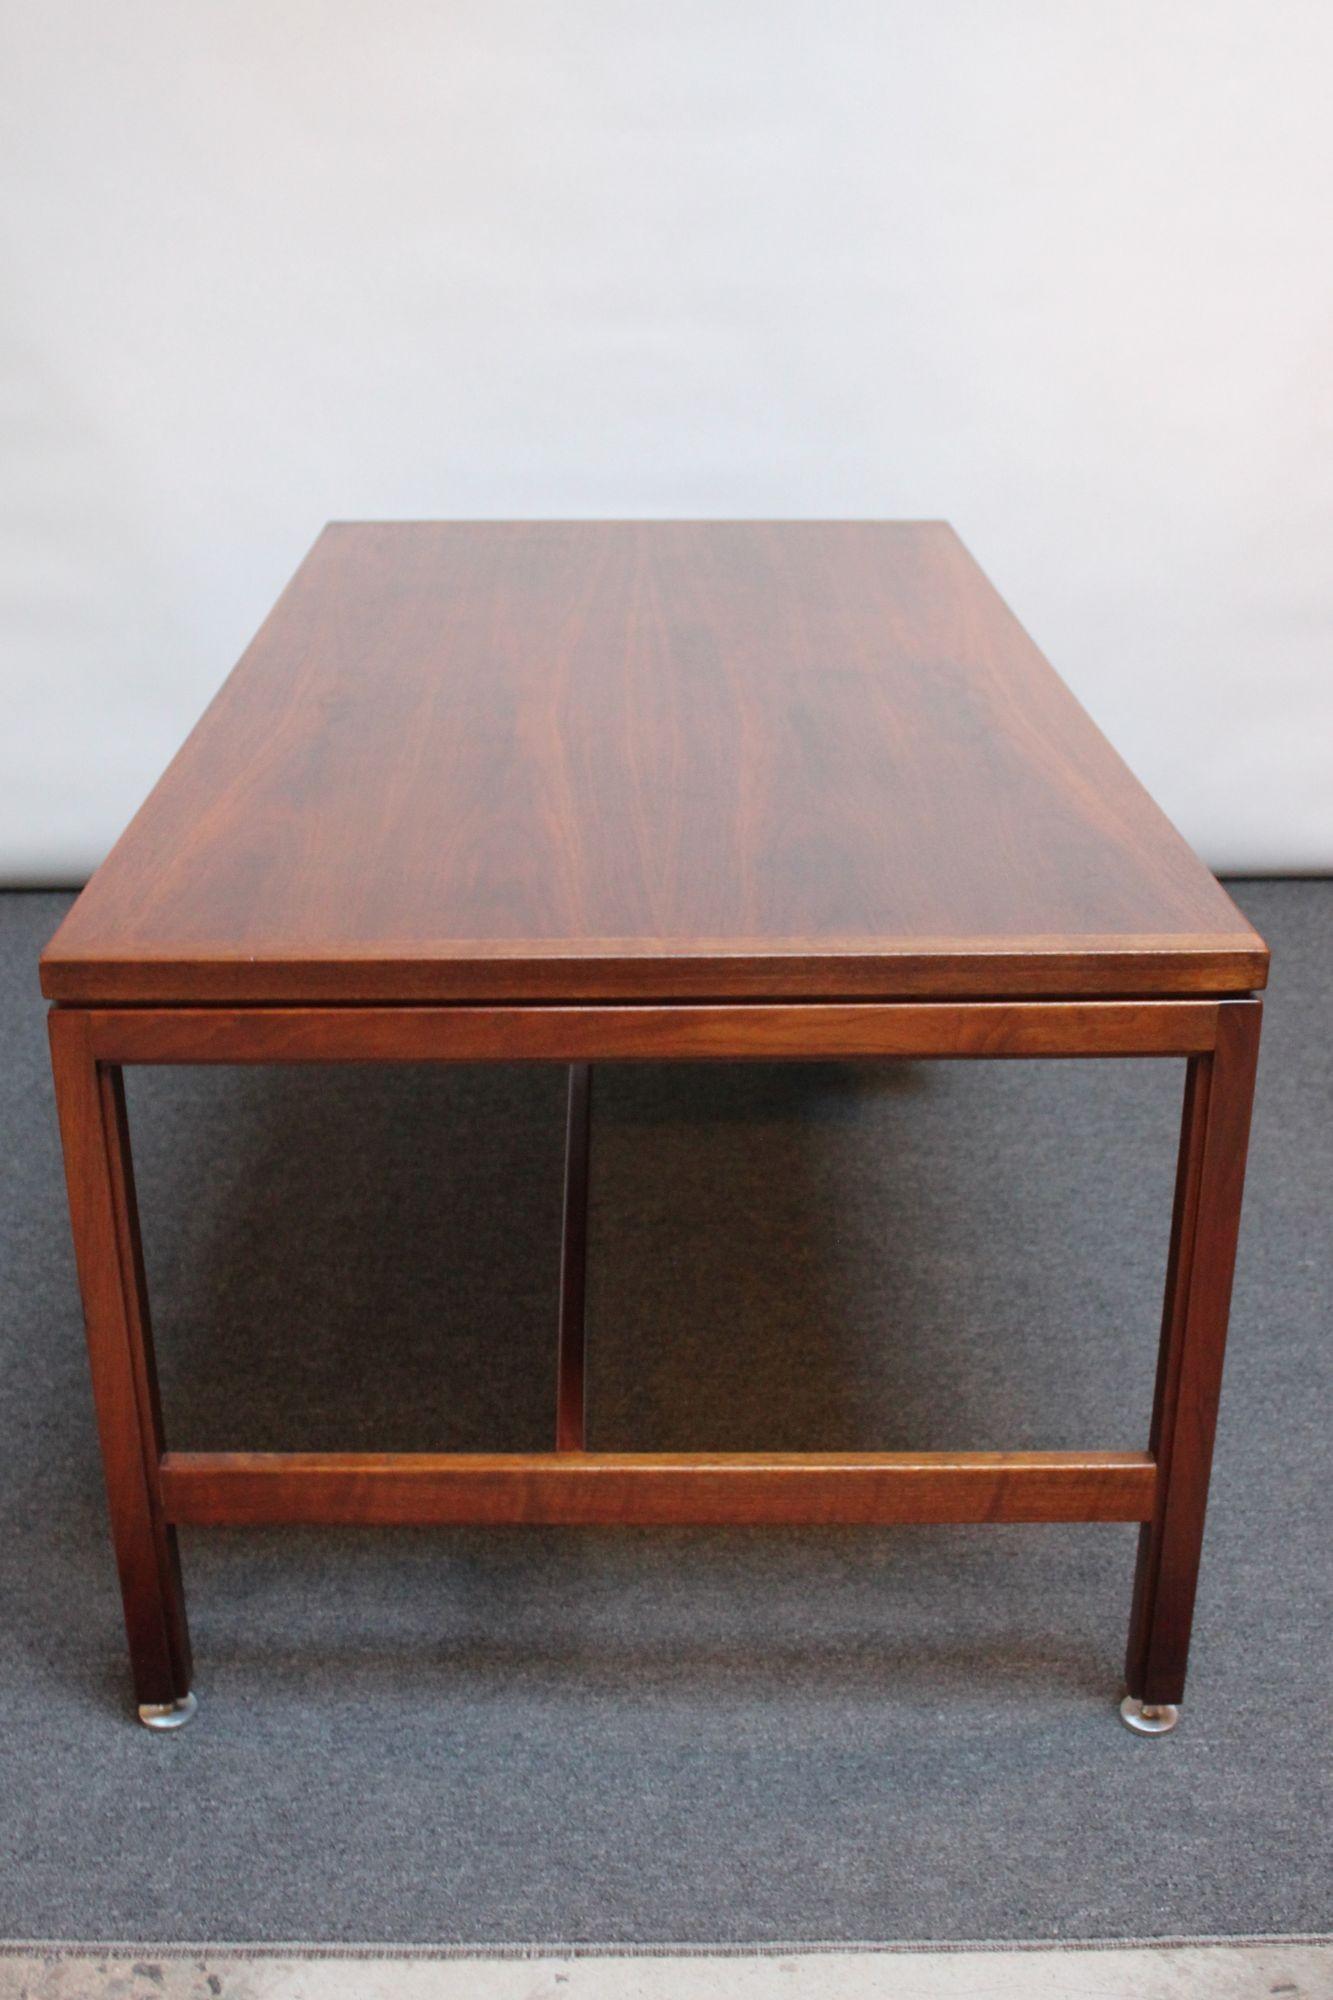 Mid-20th Century Mid-Century Modern Walnut Executive Desk with File Cabinet Drawer by Jens Risom